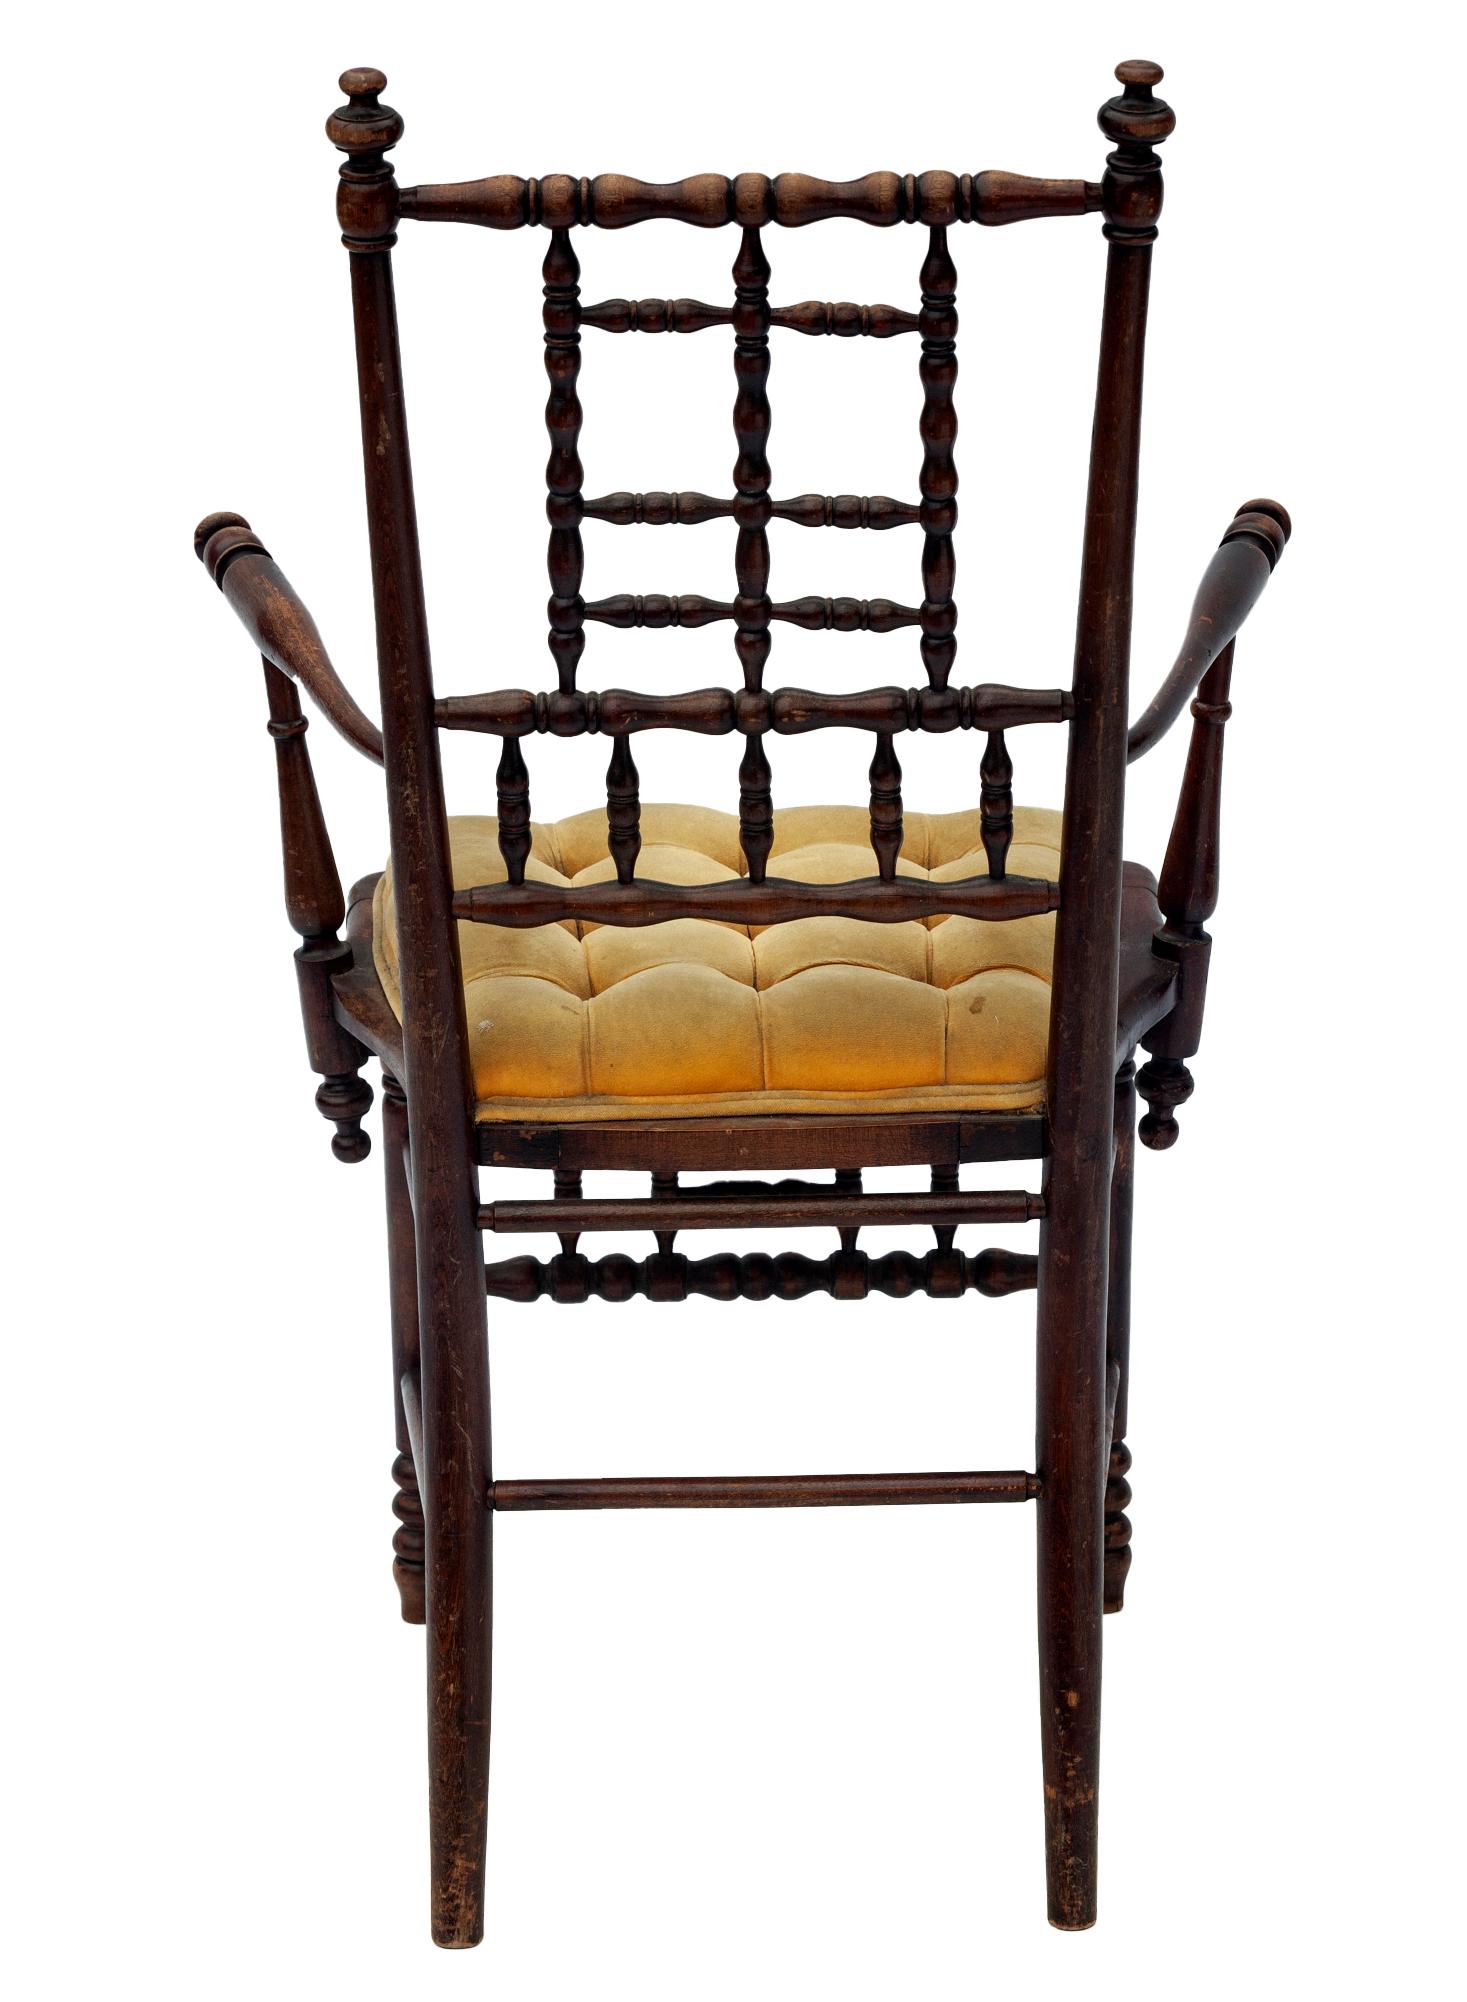 Hand-Crafted Arts & Crafts Wood Chair with Yellow Velvet Seat For Sale